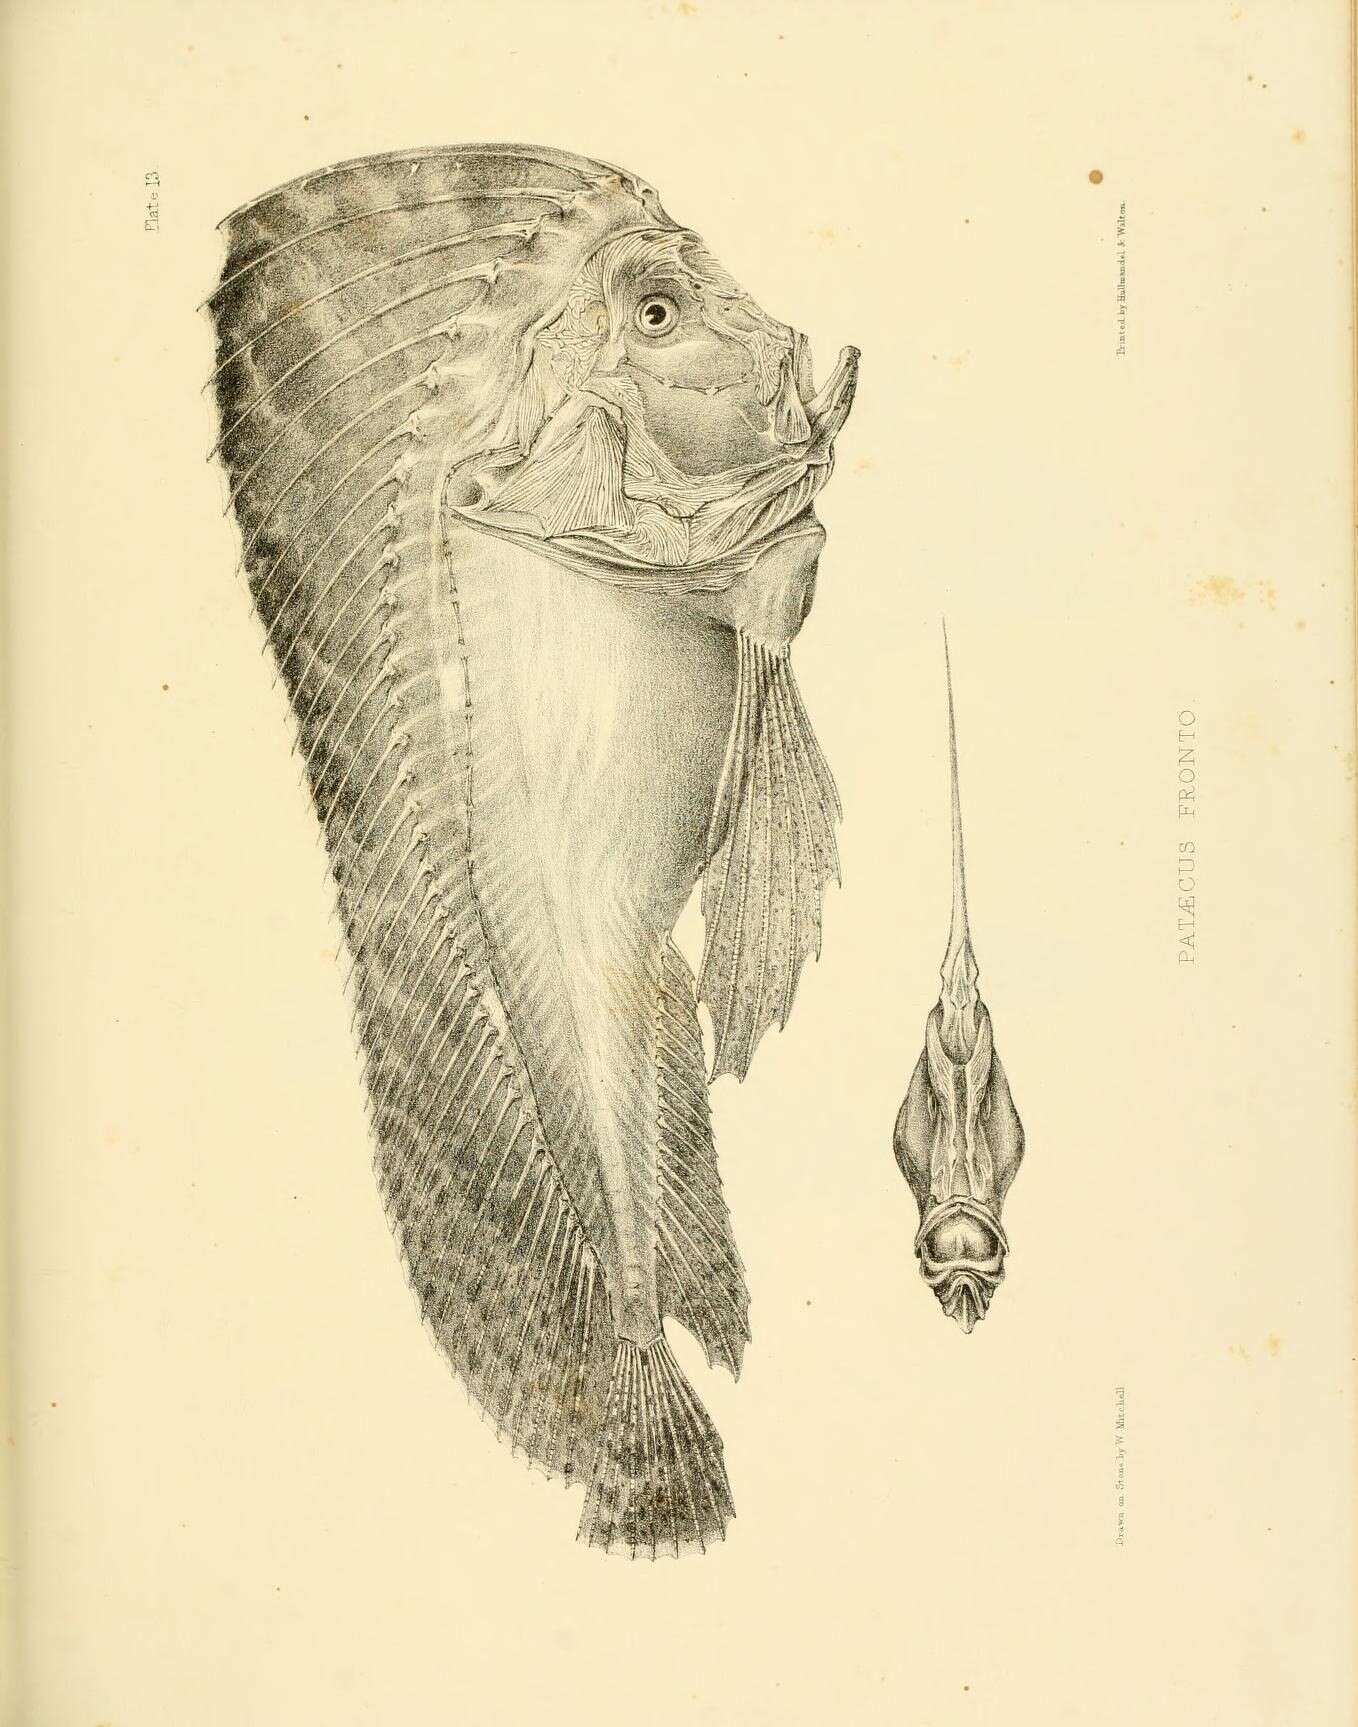 Image of Red Indian fish